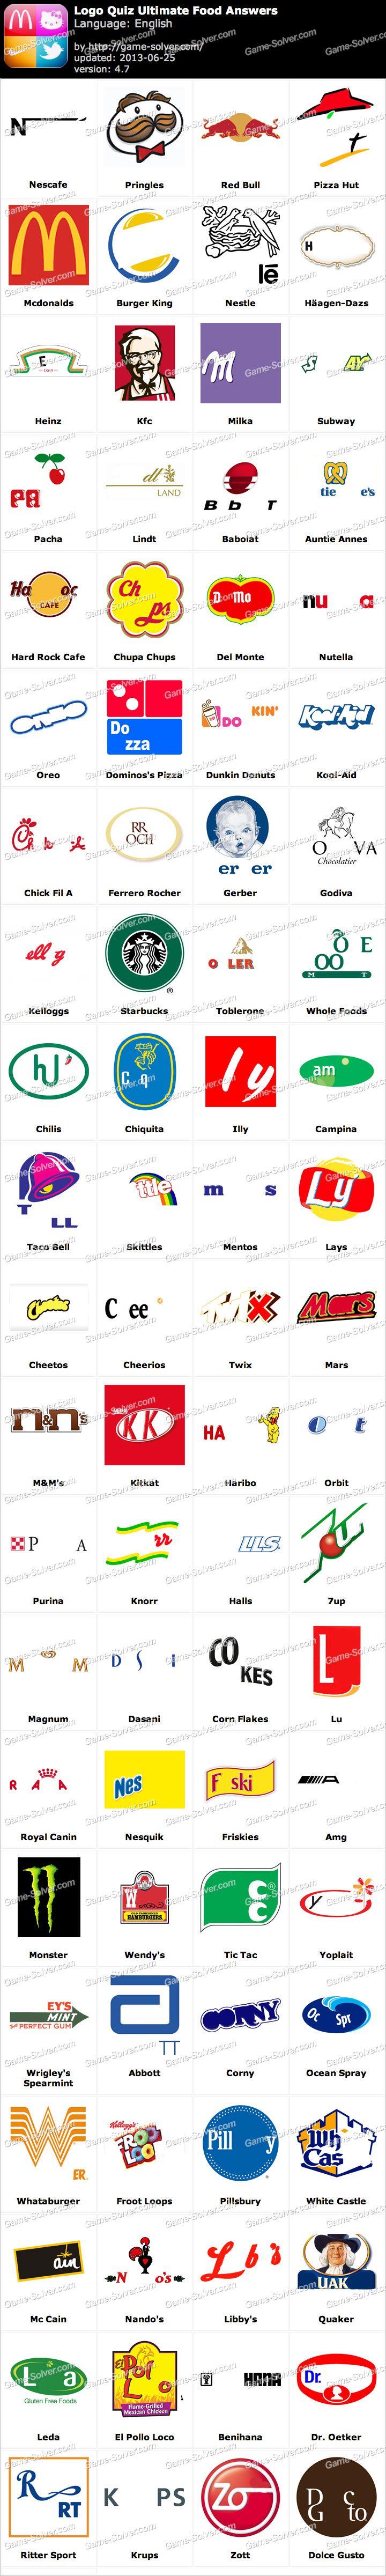 Word Starts with S Logo - Logo Quiz Ultimate Food Answers - Game Solver